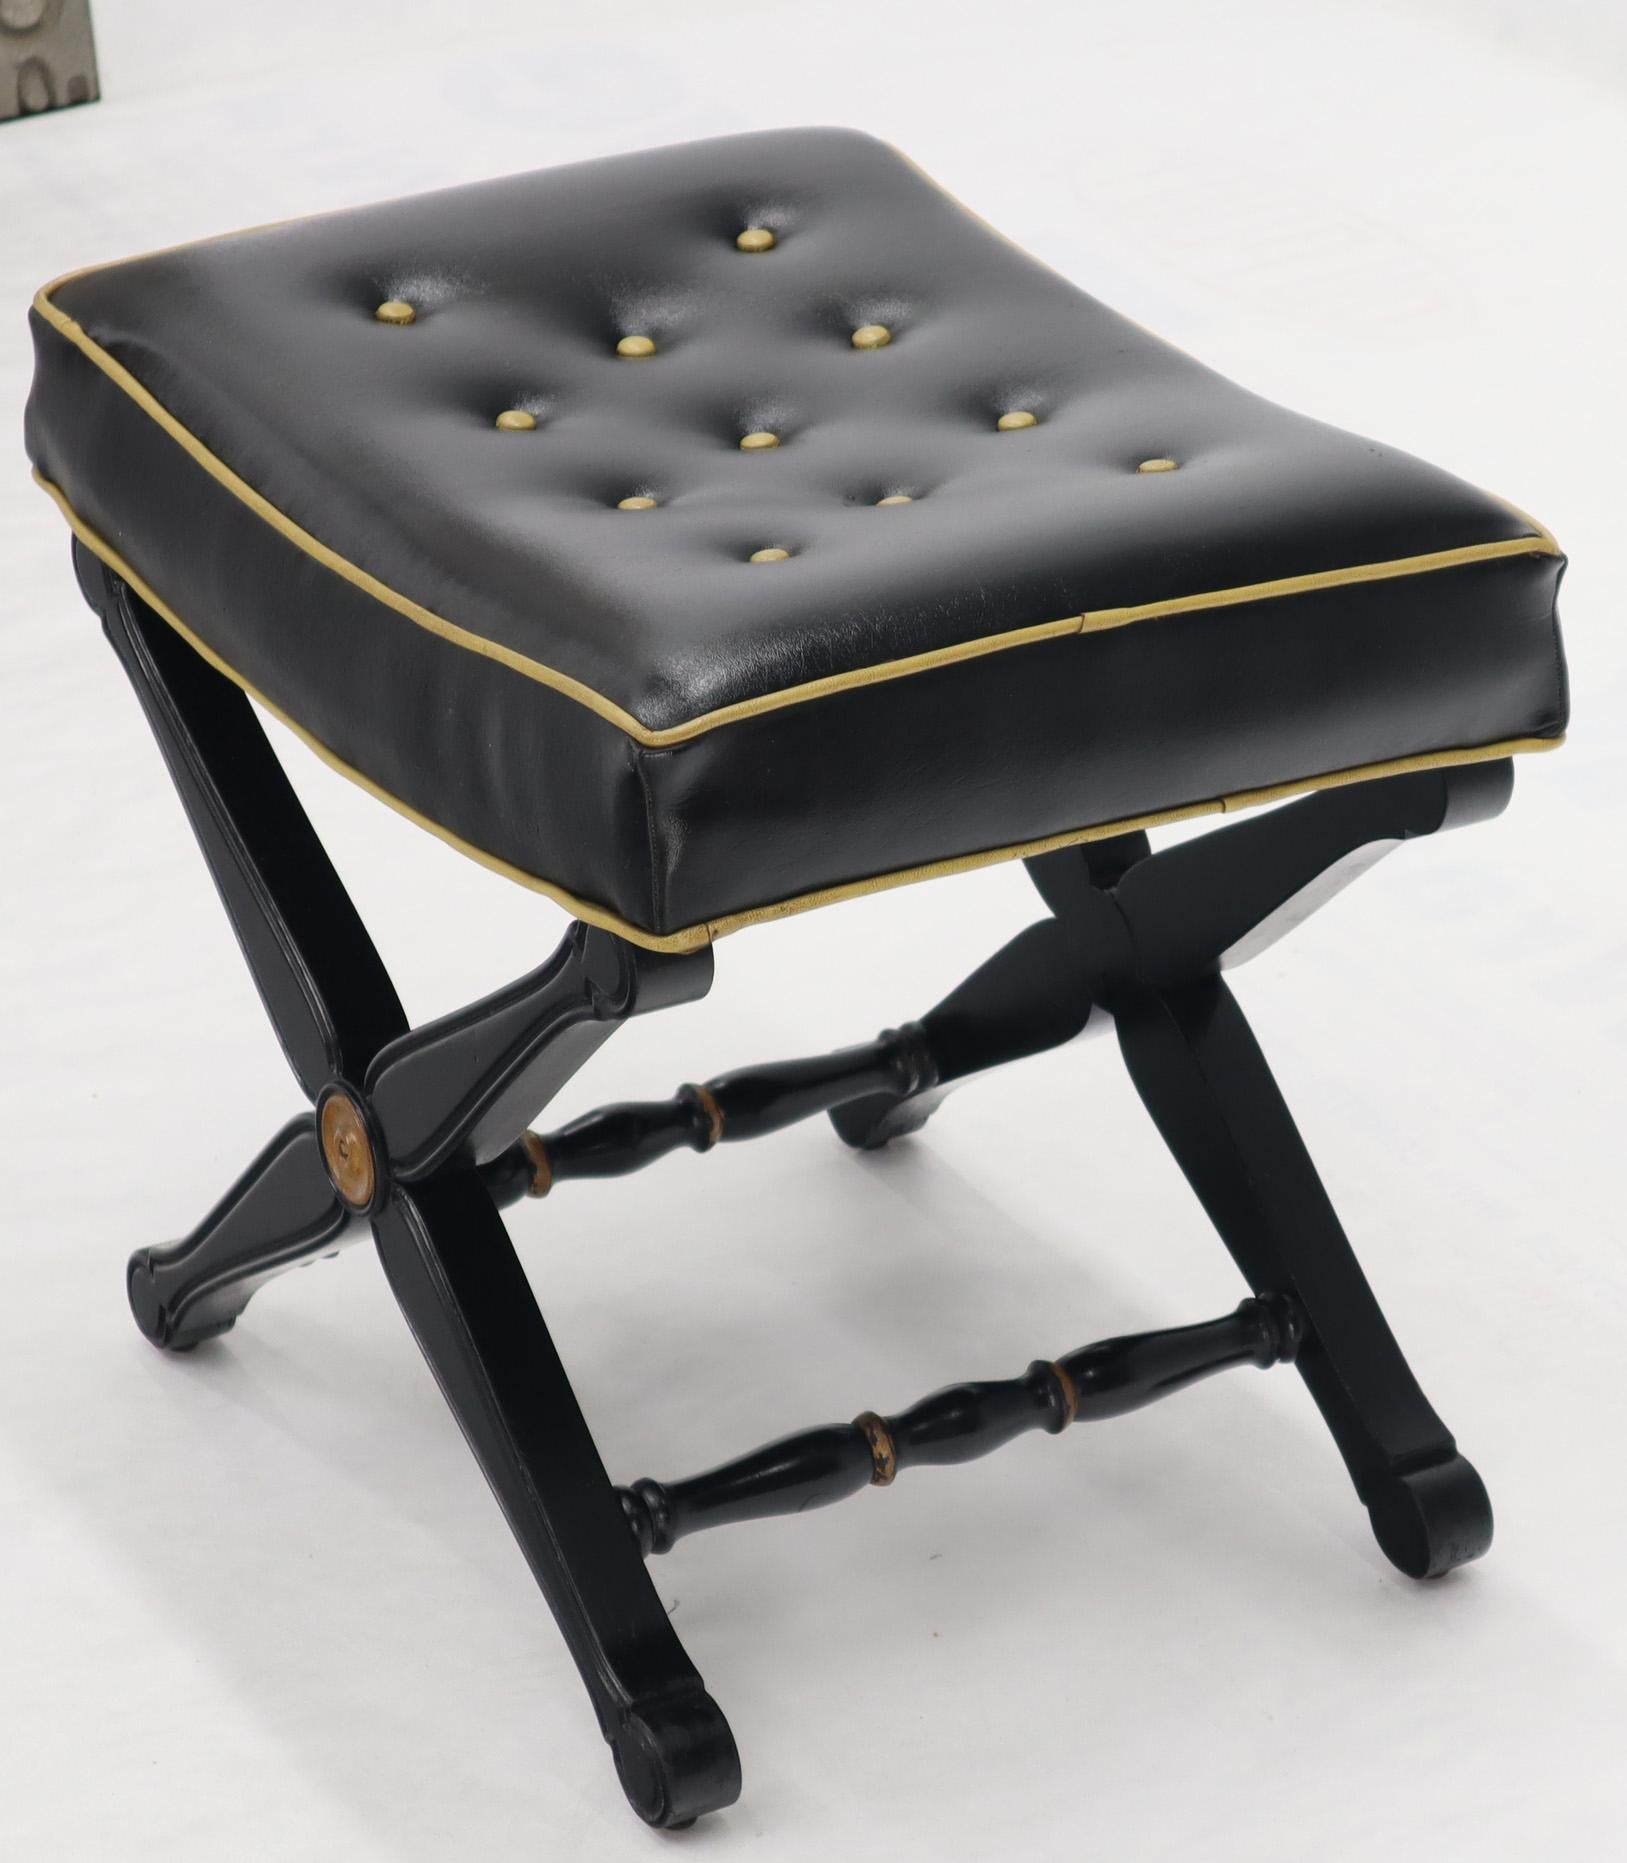 Vintage tufted upholstery black lacquer X base ottoman.